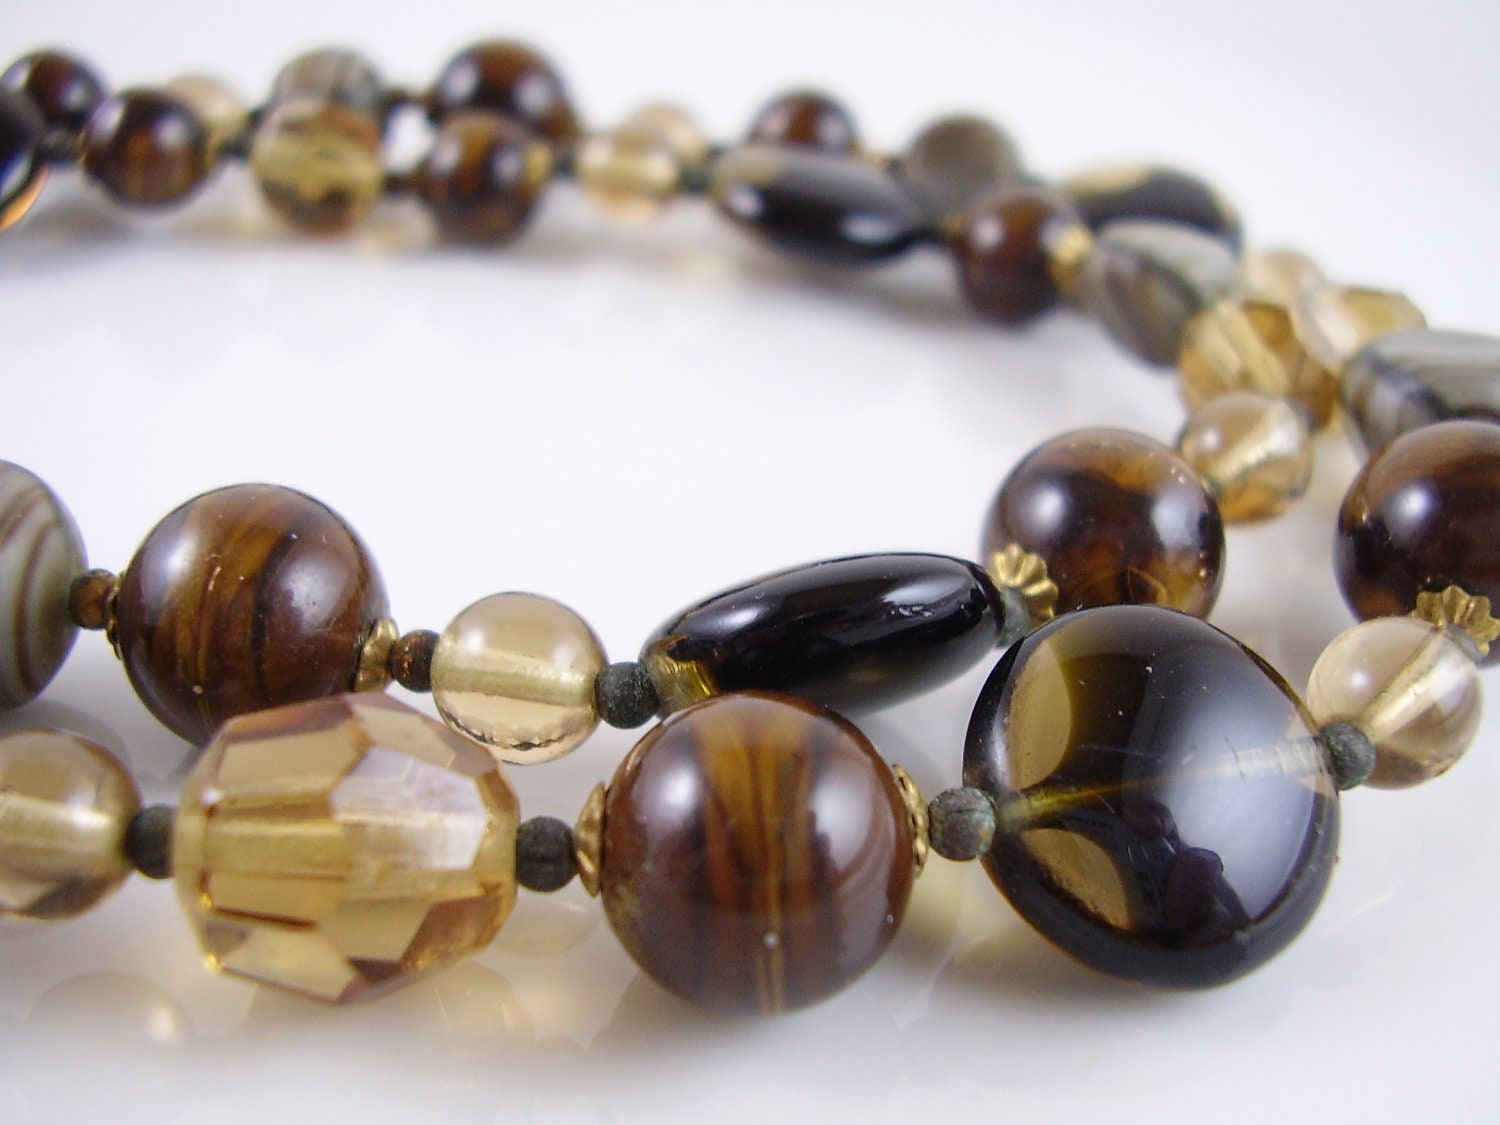 Vintage Jewelry Necklace, Vintage Brown Earth Tone Necklace - myshininglights